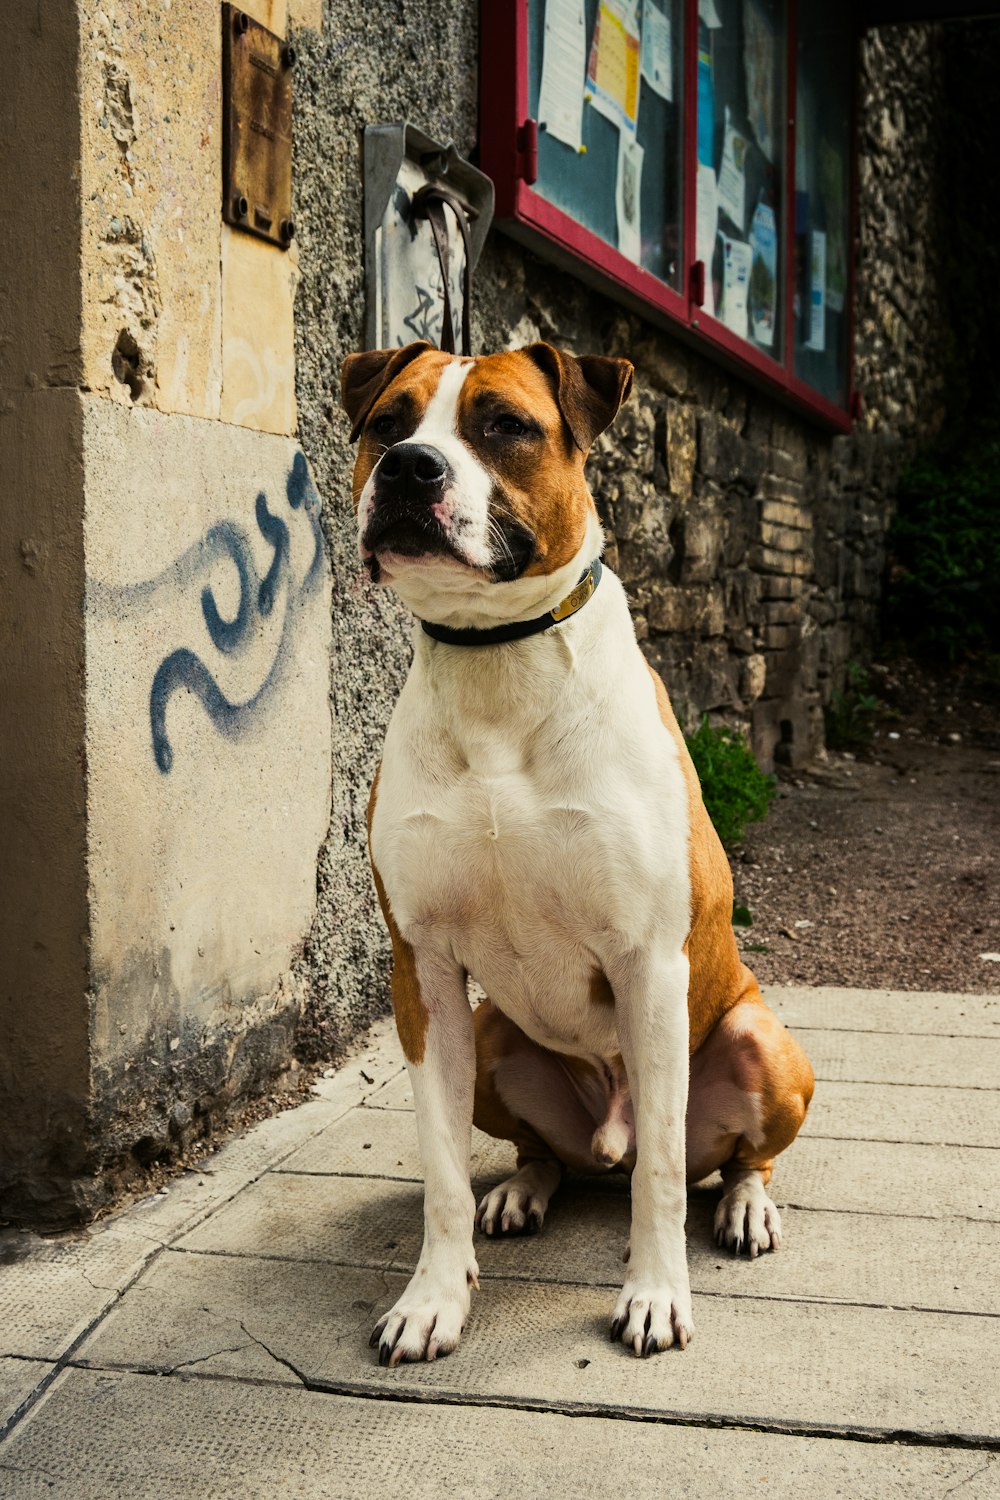 a brown and white dog sitting on a sidewalk